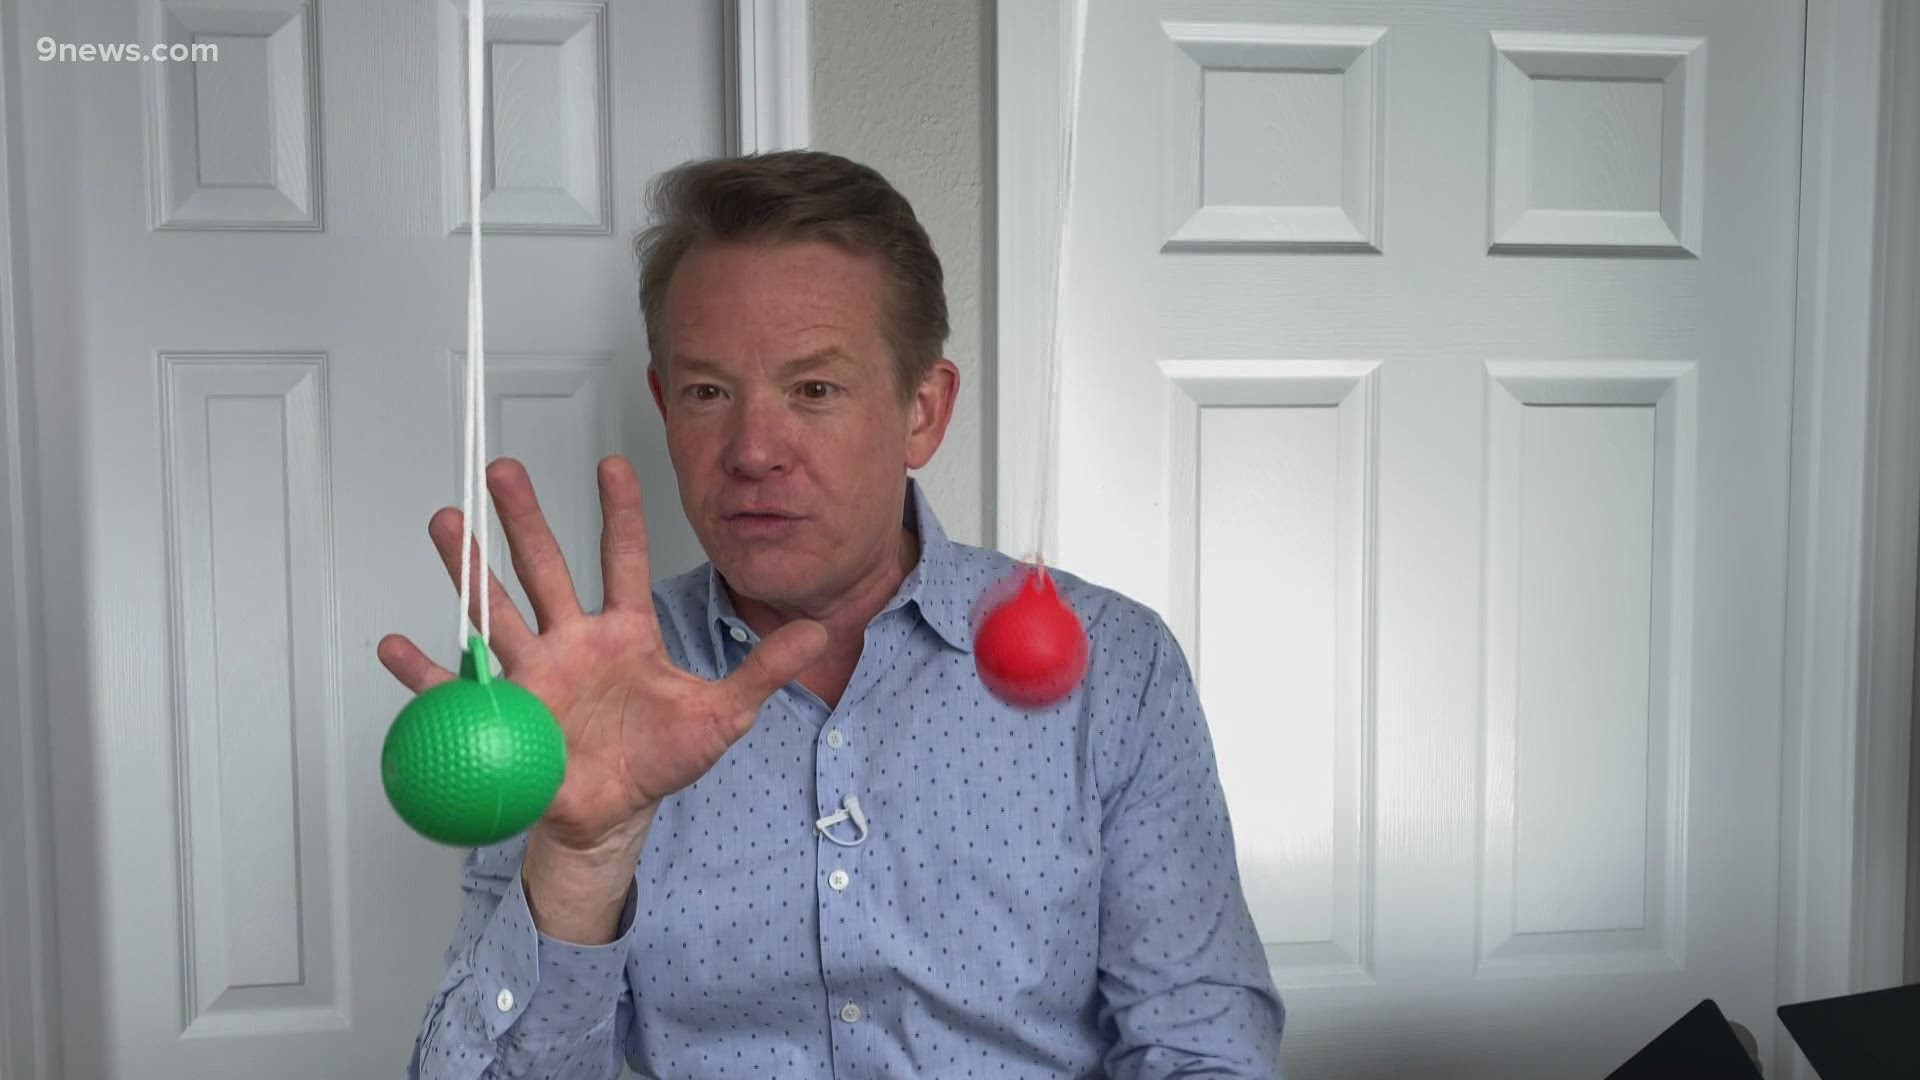 Steve Spangler uses a pendulum swing to explain how the motion of objects can be manipulated.